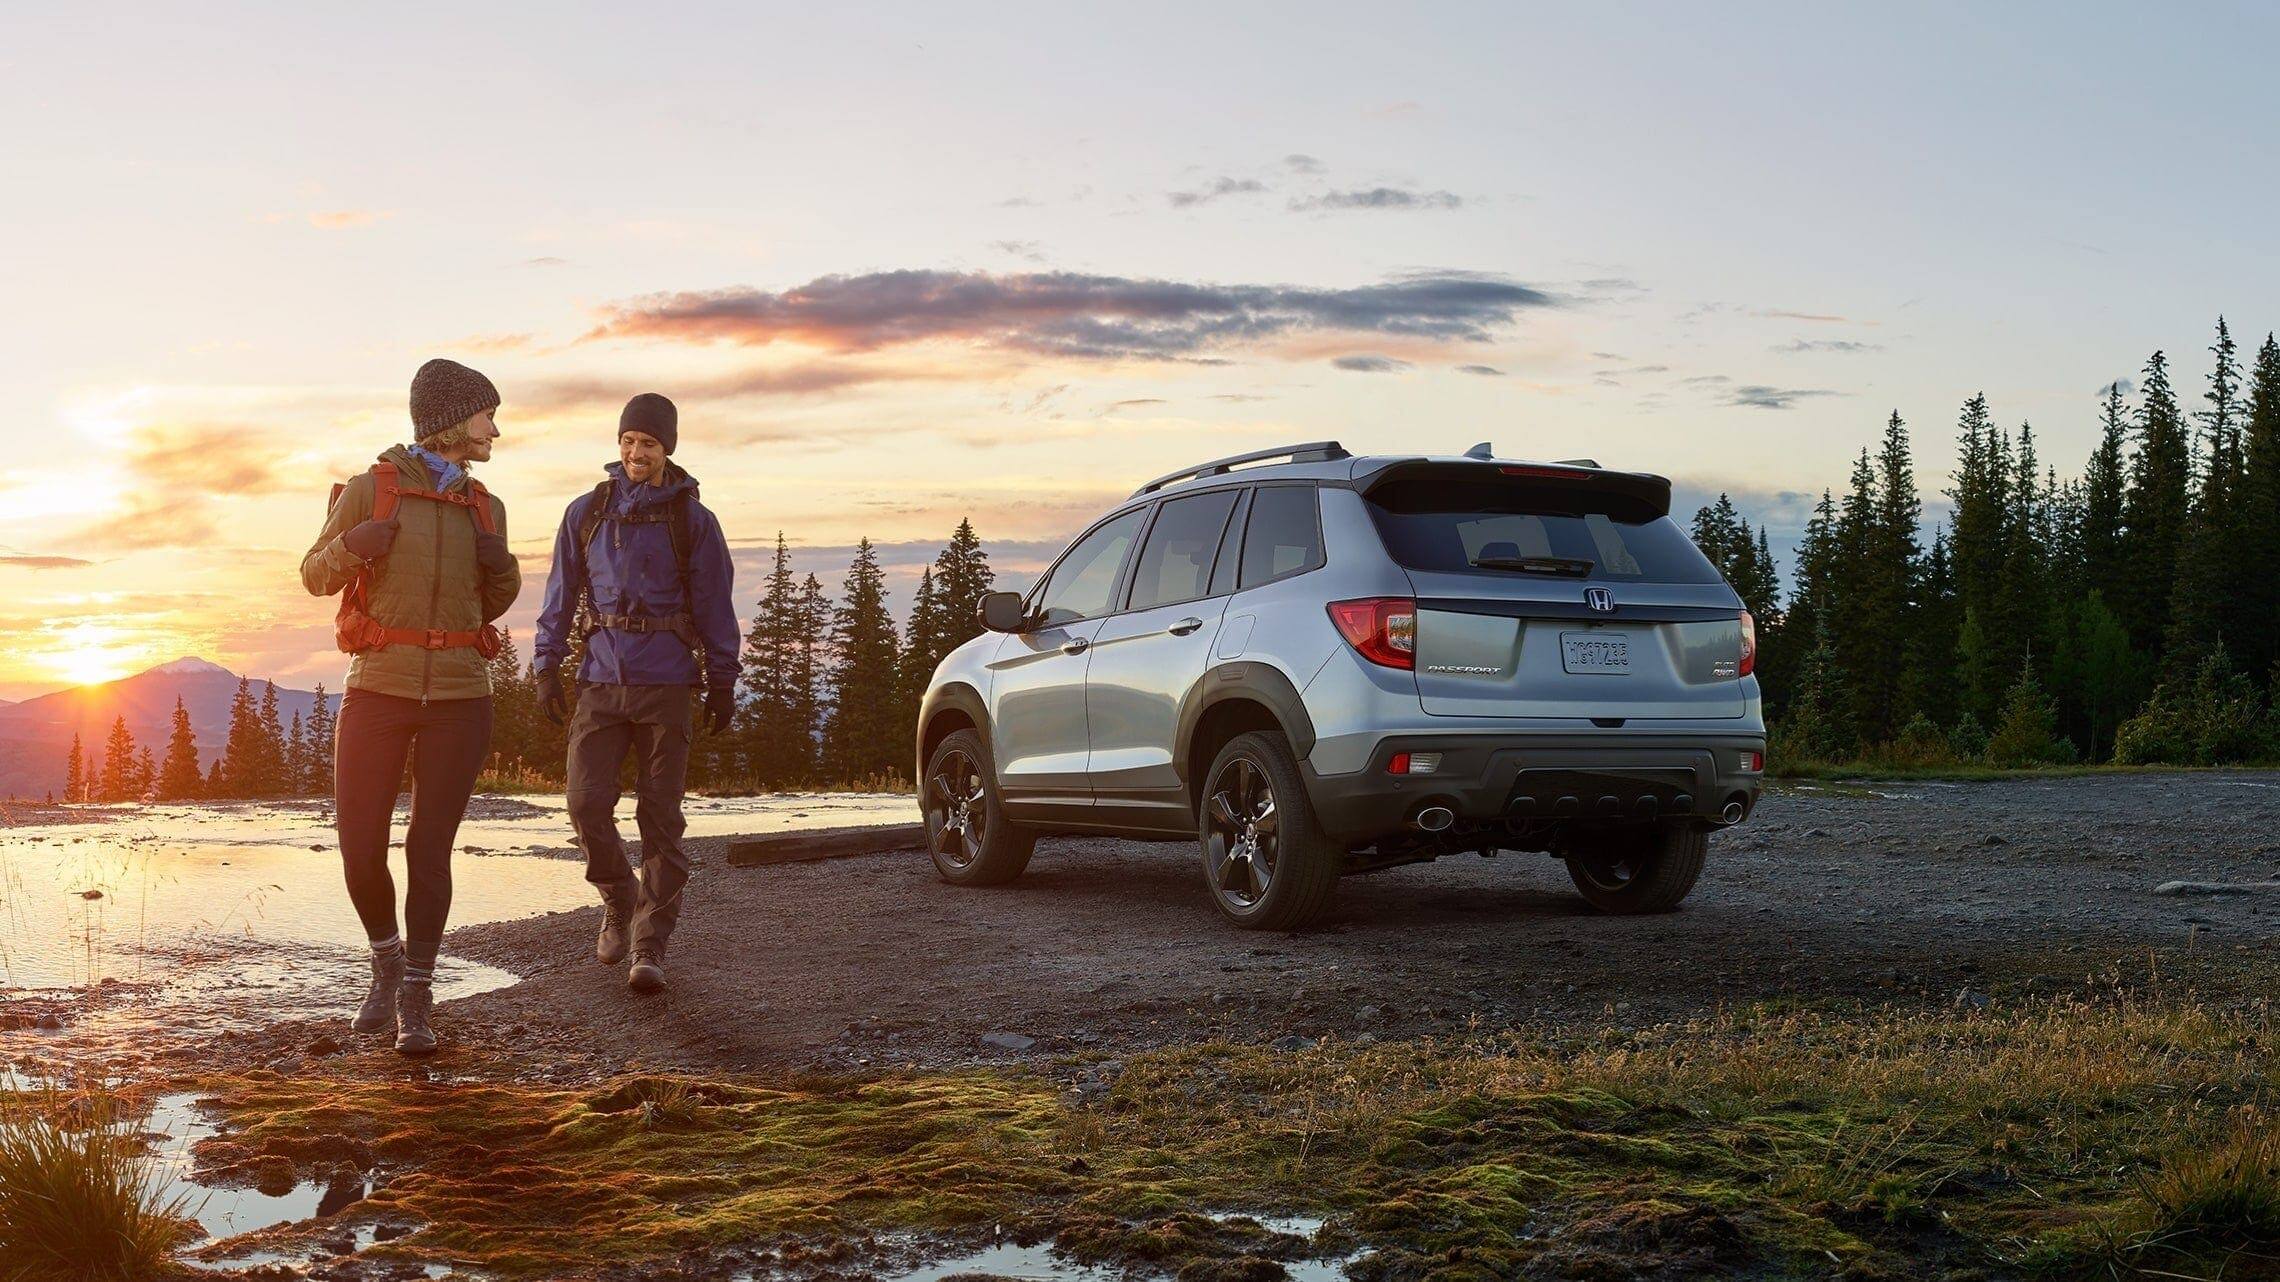 Driver-side 3/4 rear of 2019 Honda Passport Elite in Lunar Silver Metallic with accessory fender flares, at pond location with male and female hikers in foreground.